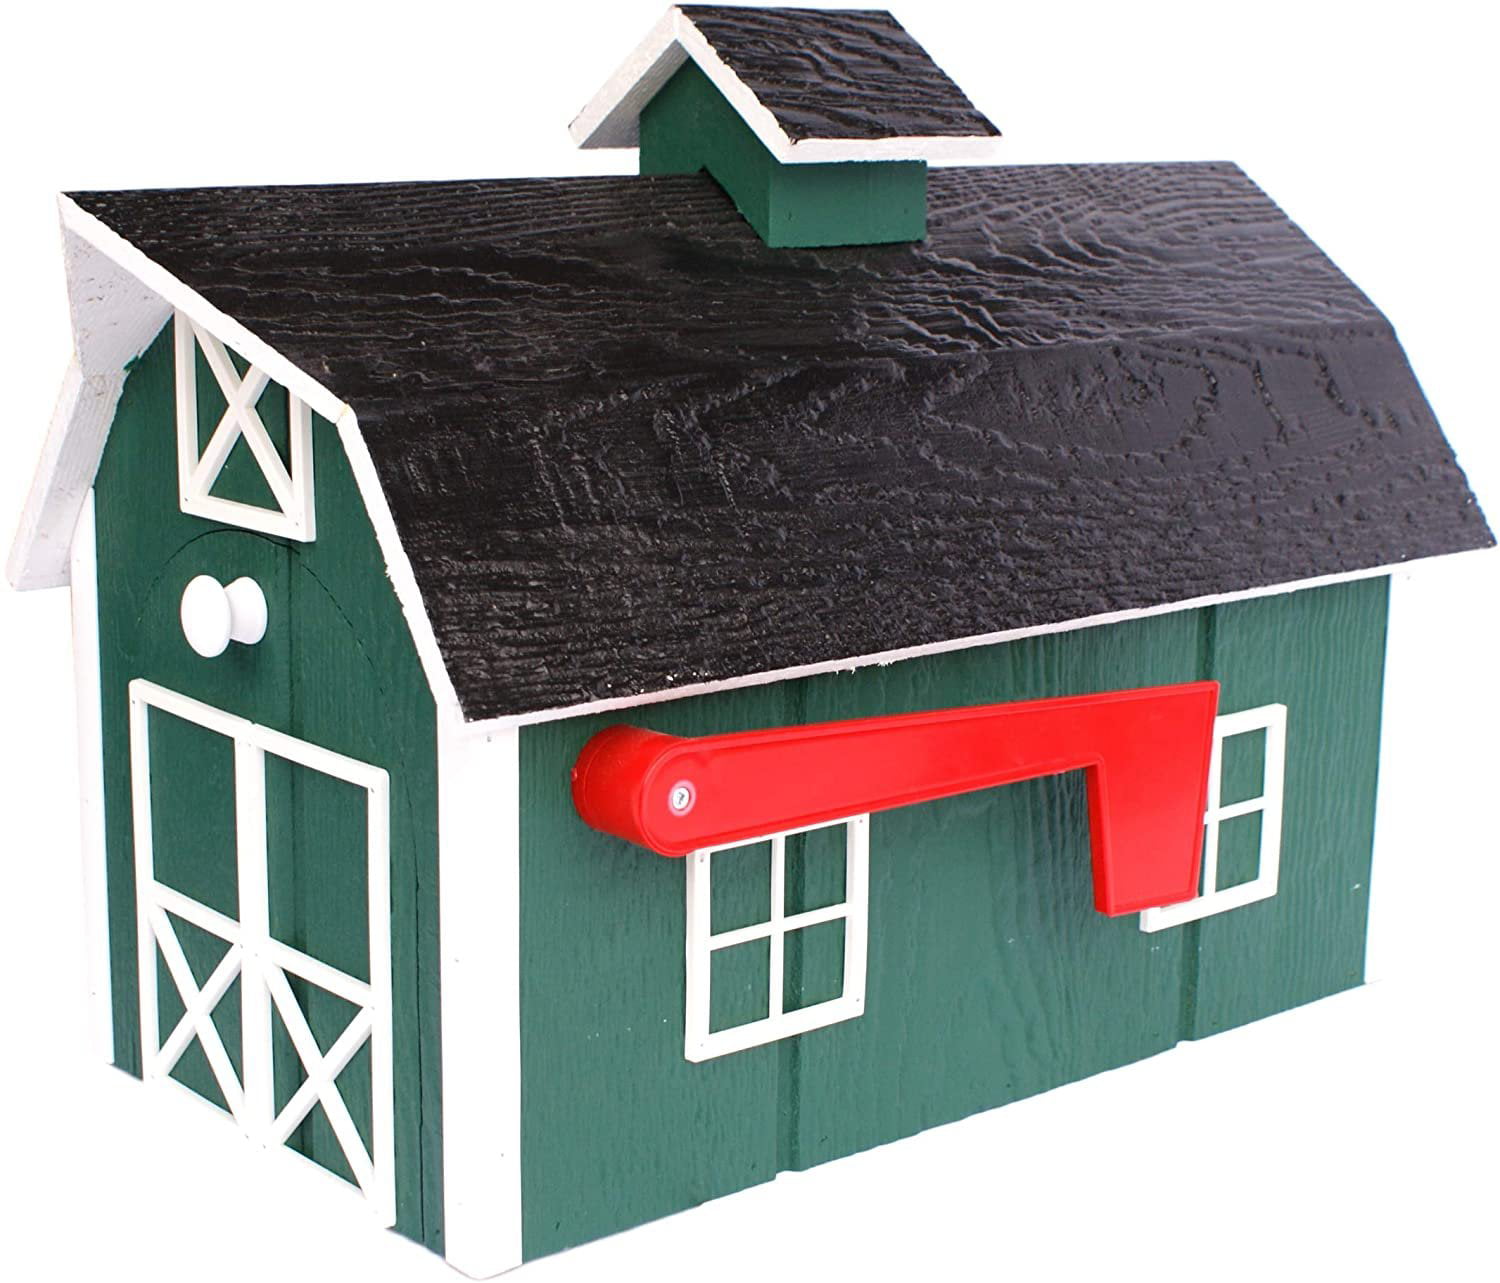 Forest Green with White Trim Painted Amish Mailbox with Cedar Roof and Windows /& Door Trim